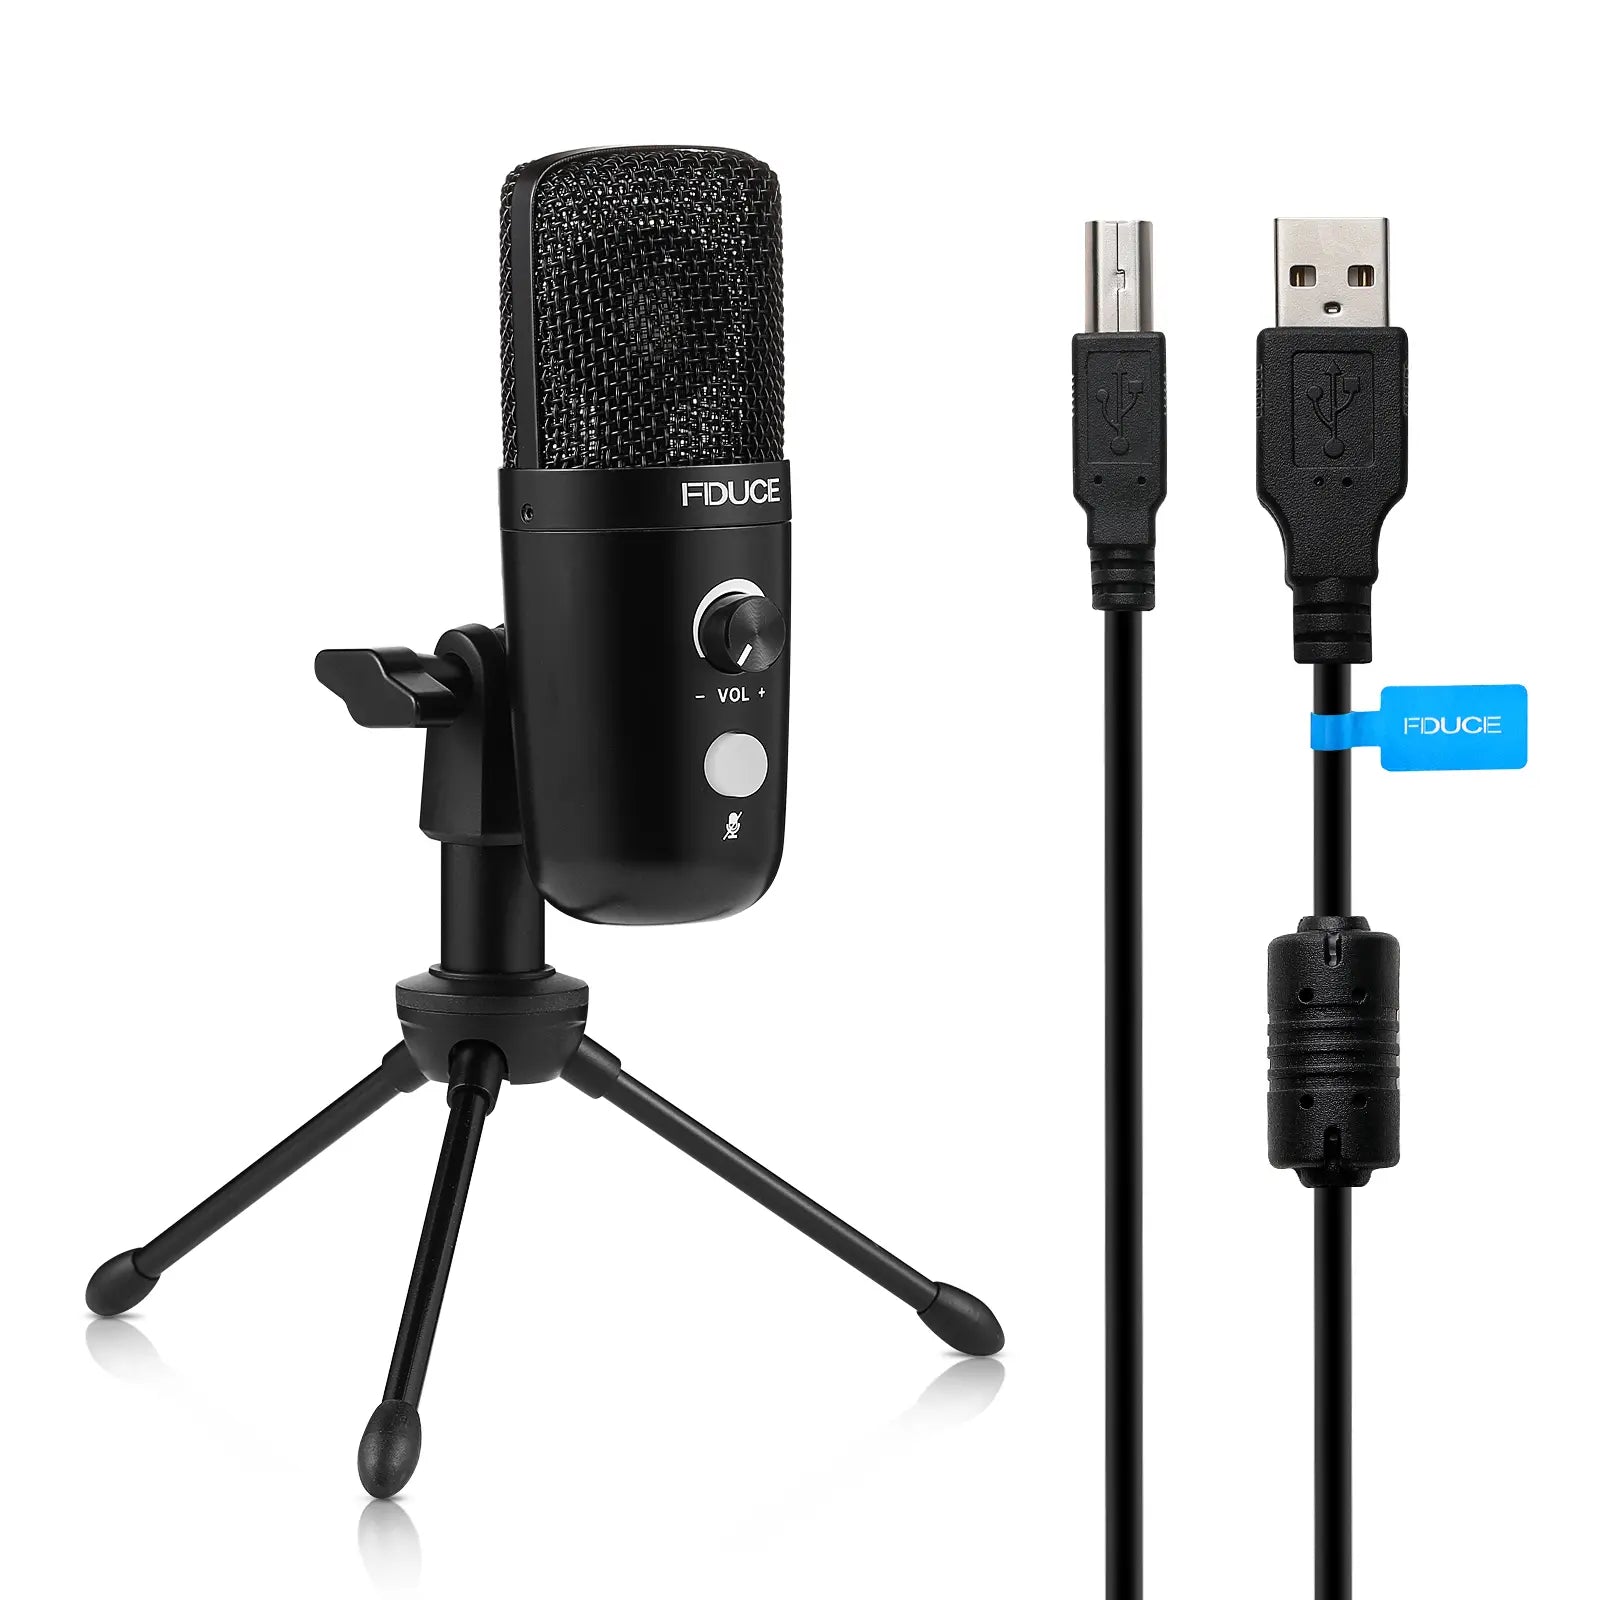  FDUCE USB Gaming Microphone for PC/PS4/PS5, Condenser Desktop  Mic for Streaming, Podcasting, Gaming with RGB Switch, Mute Button,  Headphone Monitoring, Pop Filter, Tripod stand-SL160 : Video Games